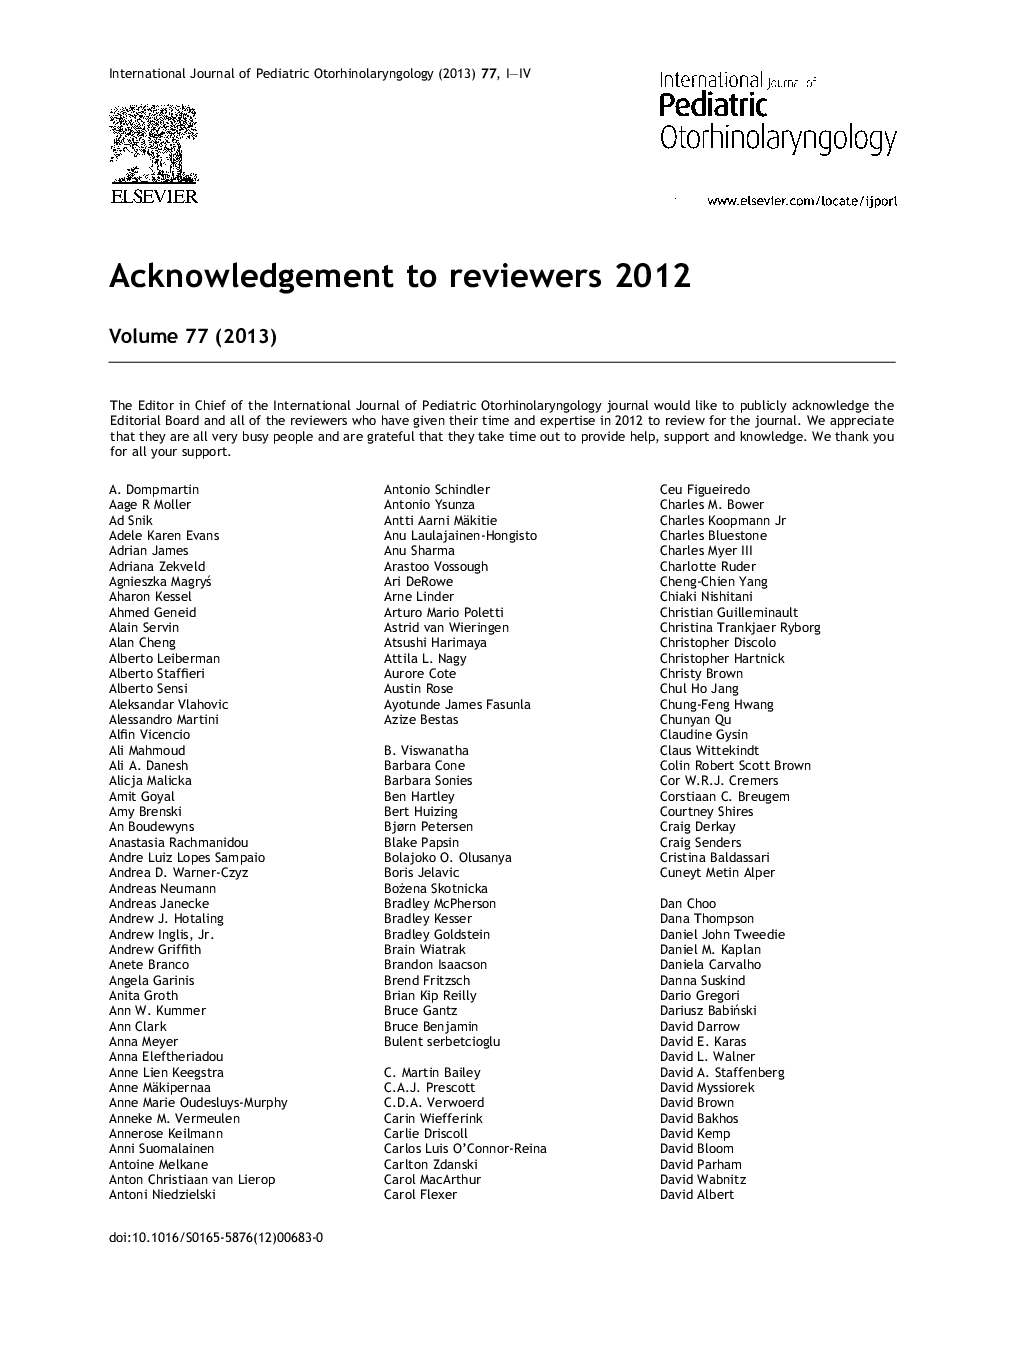 Acknowledgement to reviewers 2011